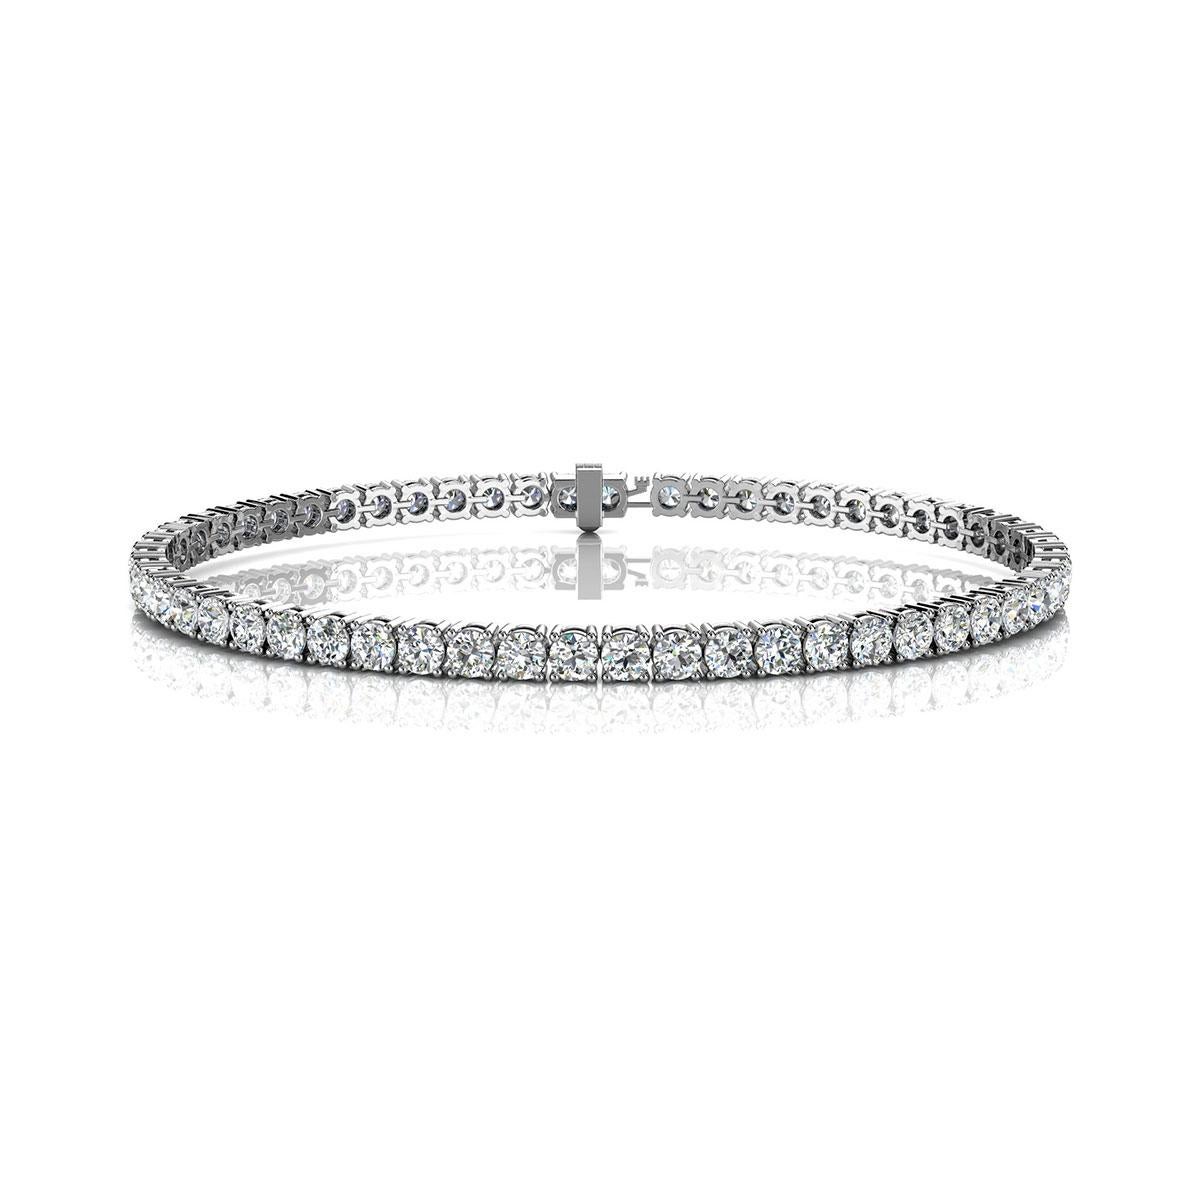 A timeless four prongs diamonds tennis bracelet. Experience the Difference!

Product details: 

Center Gemstone Type: NATURAL DIAMOND
Center Gemstone Color: WHITE
Center Gemstone Shape: ROUND
Center Diamond Carat Weight: 5
Metal: 14K White